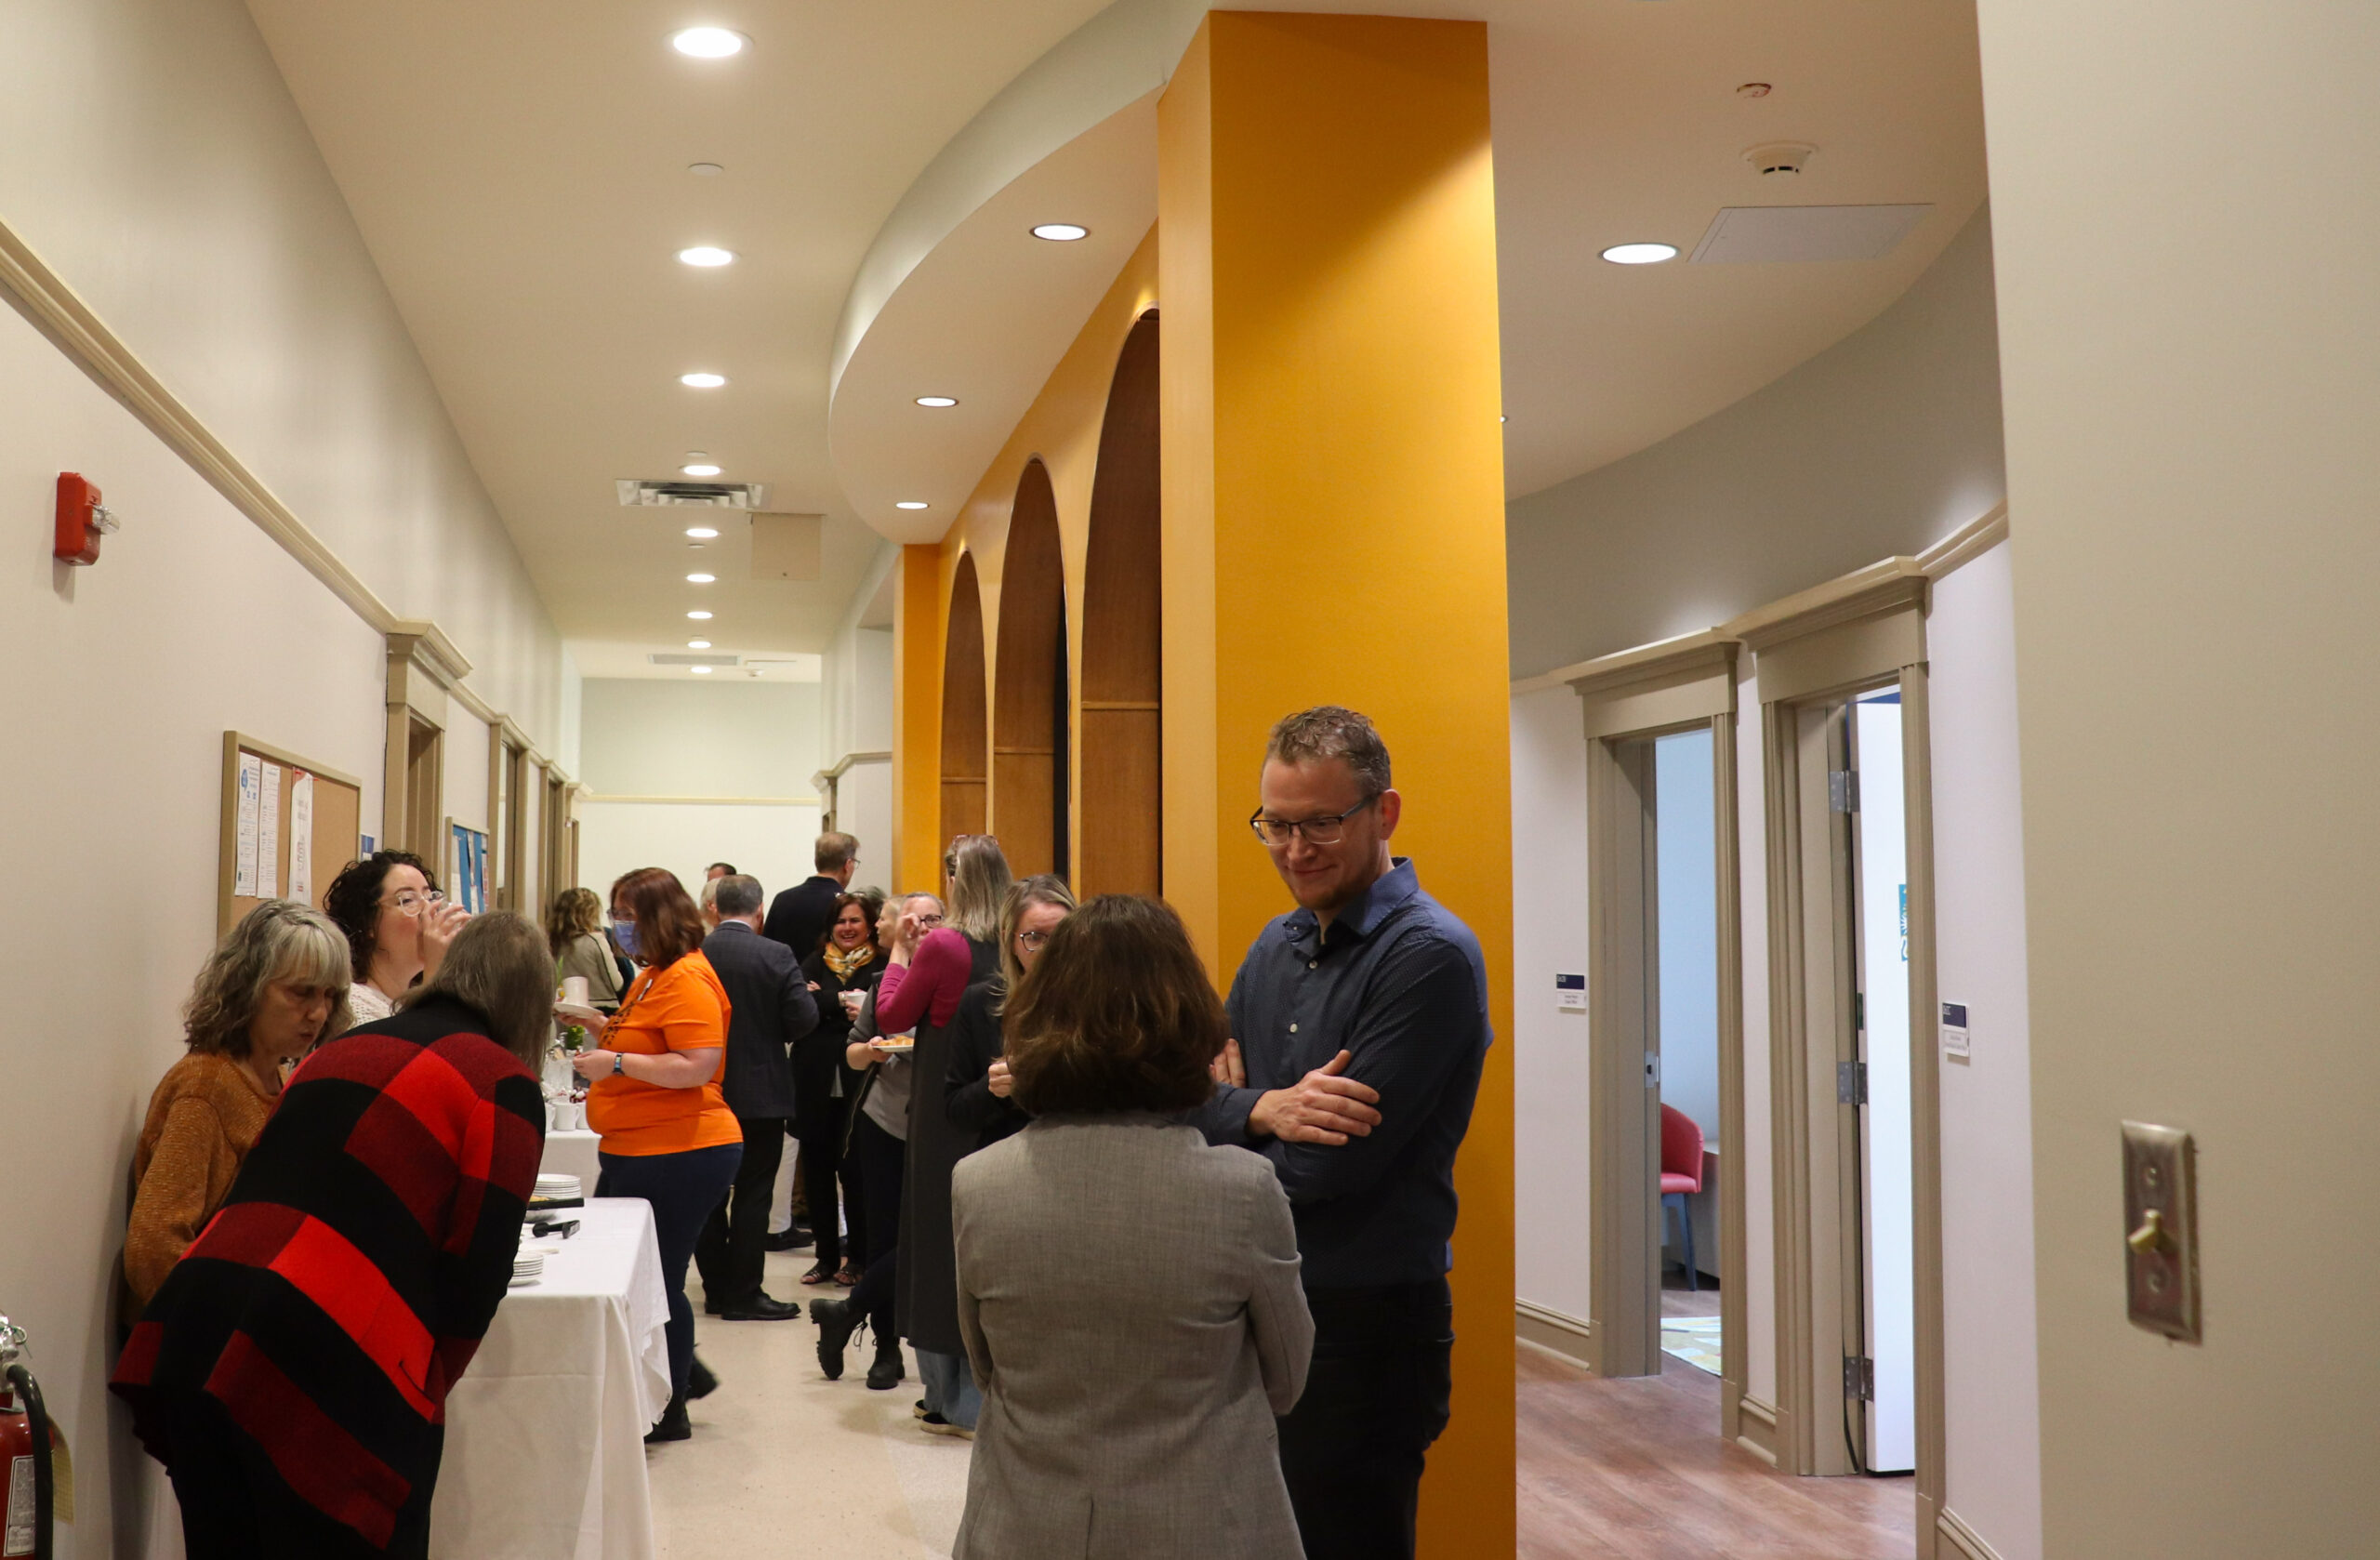 King's staff members mingle in the new Deane Little Community Support Centre.